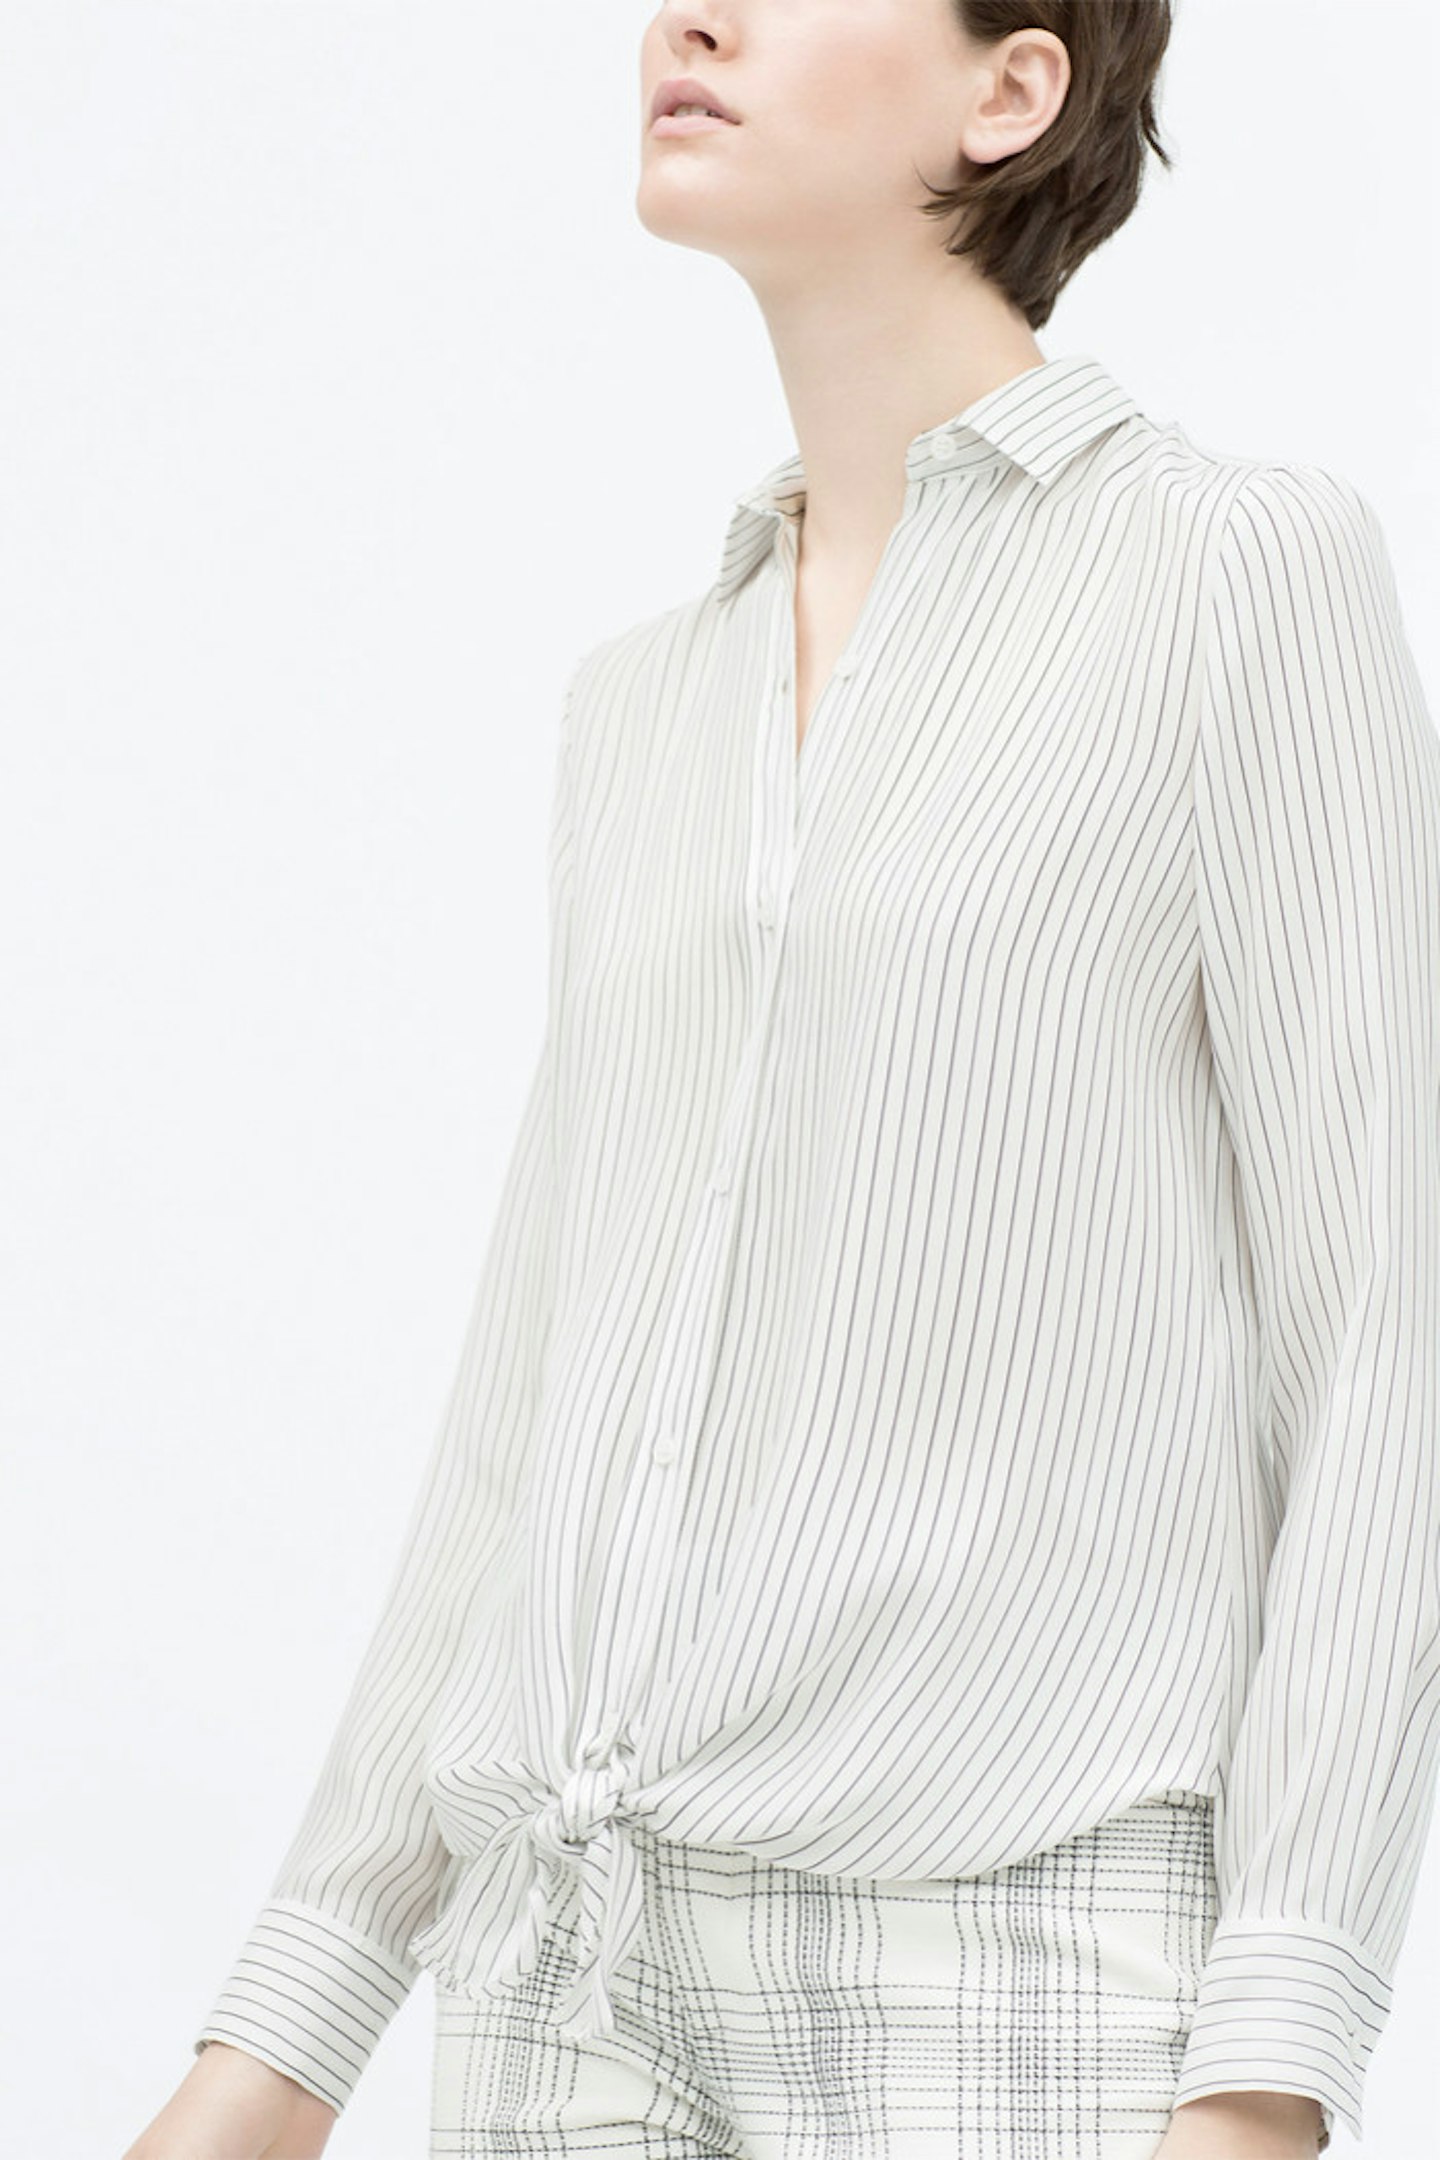 GraziaDaily contributor Rebecca Kelsey: 'I'm a sucker for a silk shirt, so was instantly drawn to this little stripy number. Perfect over a pair of silk shorts during summer, it'll carry me through to autumn nicely when swapped for a pair of leather joggers. A timeless classic.'